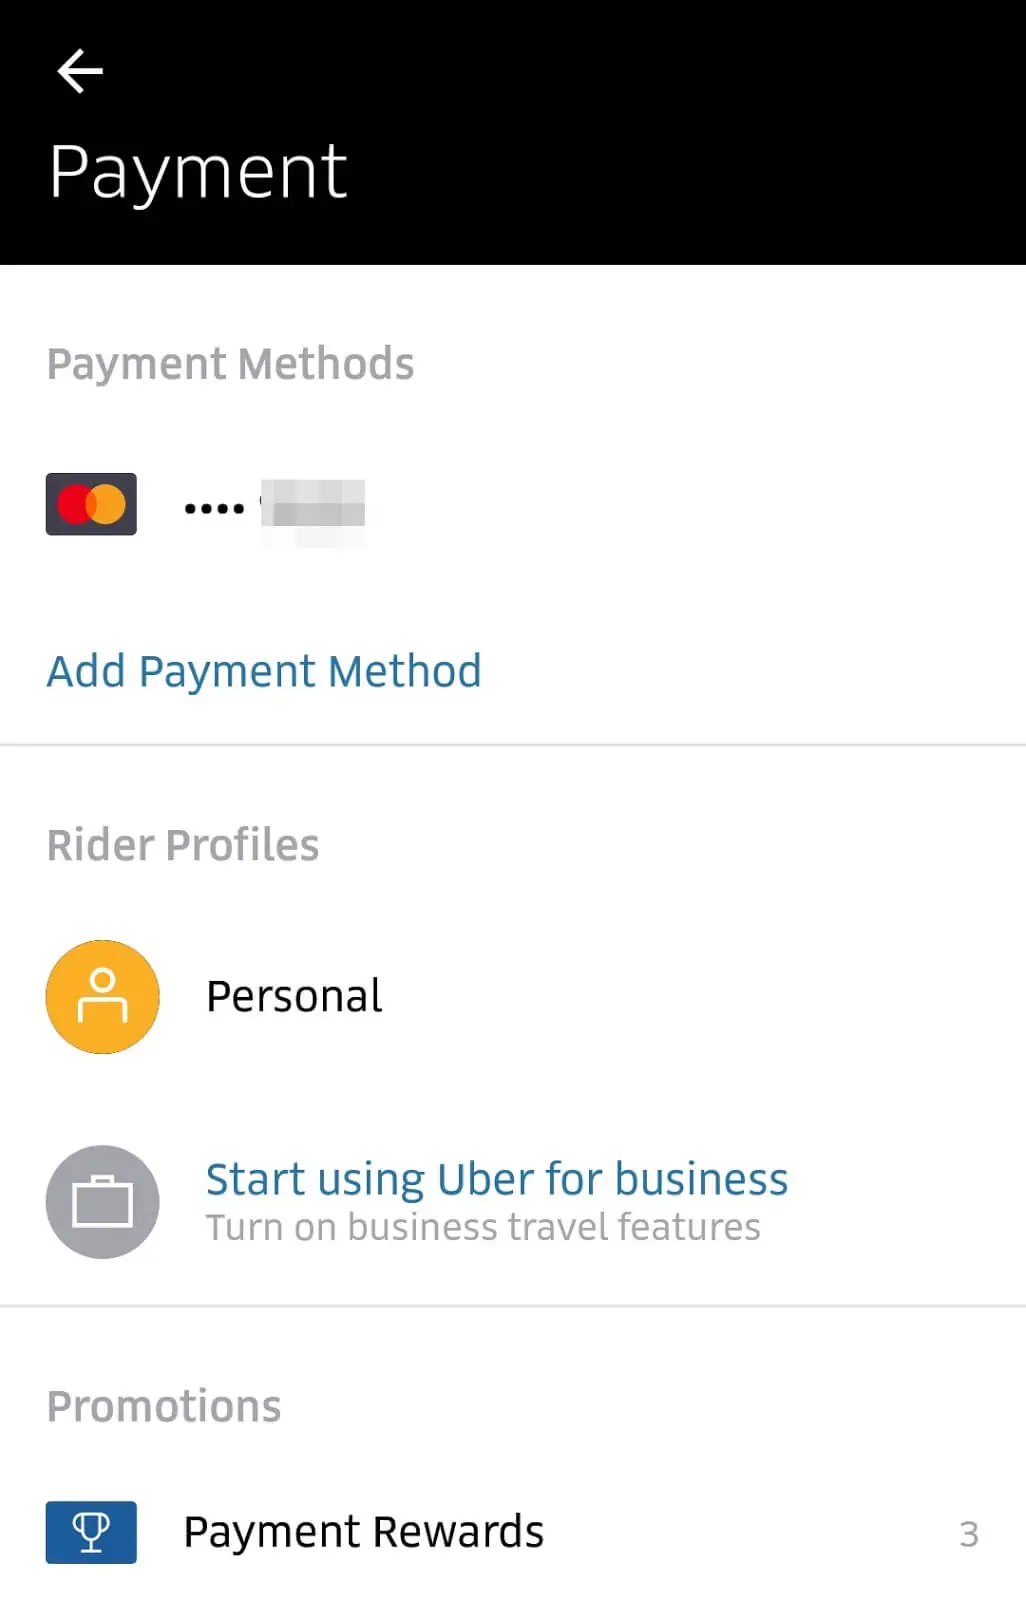 How to Remove Your Credit Card from Uber: list of payment methods